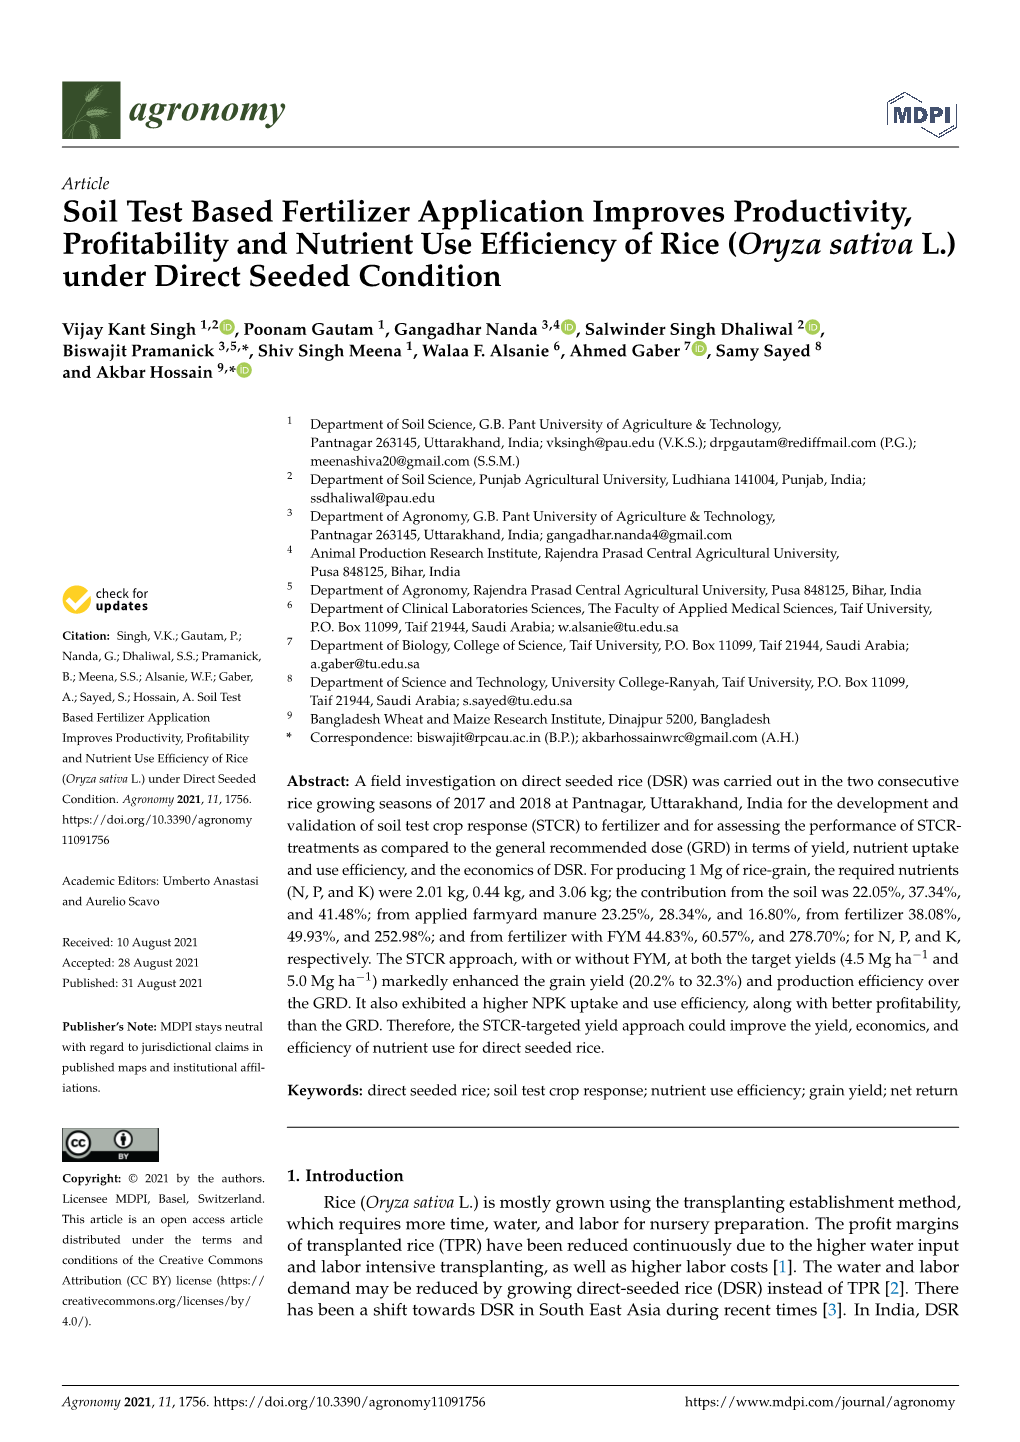 Soil Test Based Fertilizer Application Improves Productivity, Profitability and Nutrient Use Efficiency of Rice (Oryza Sativa L.) Under Direct Seeded Condition